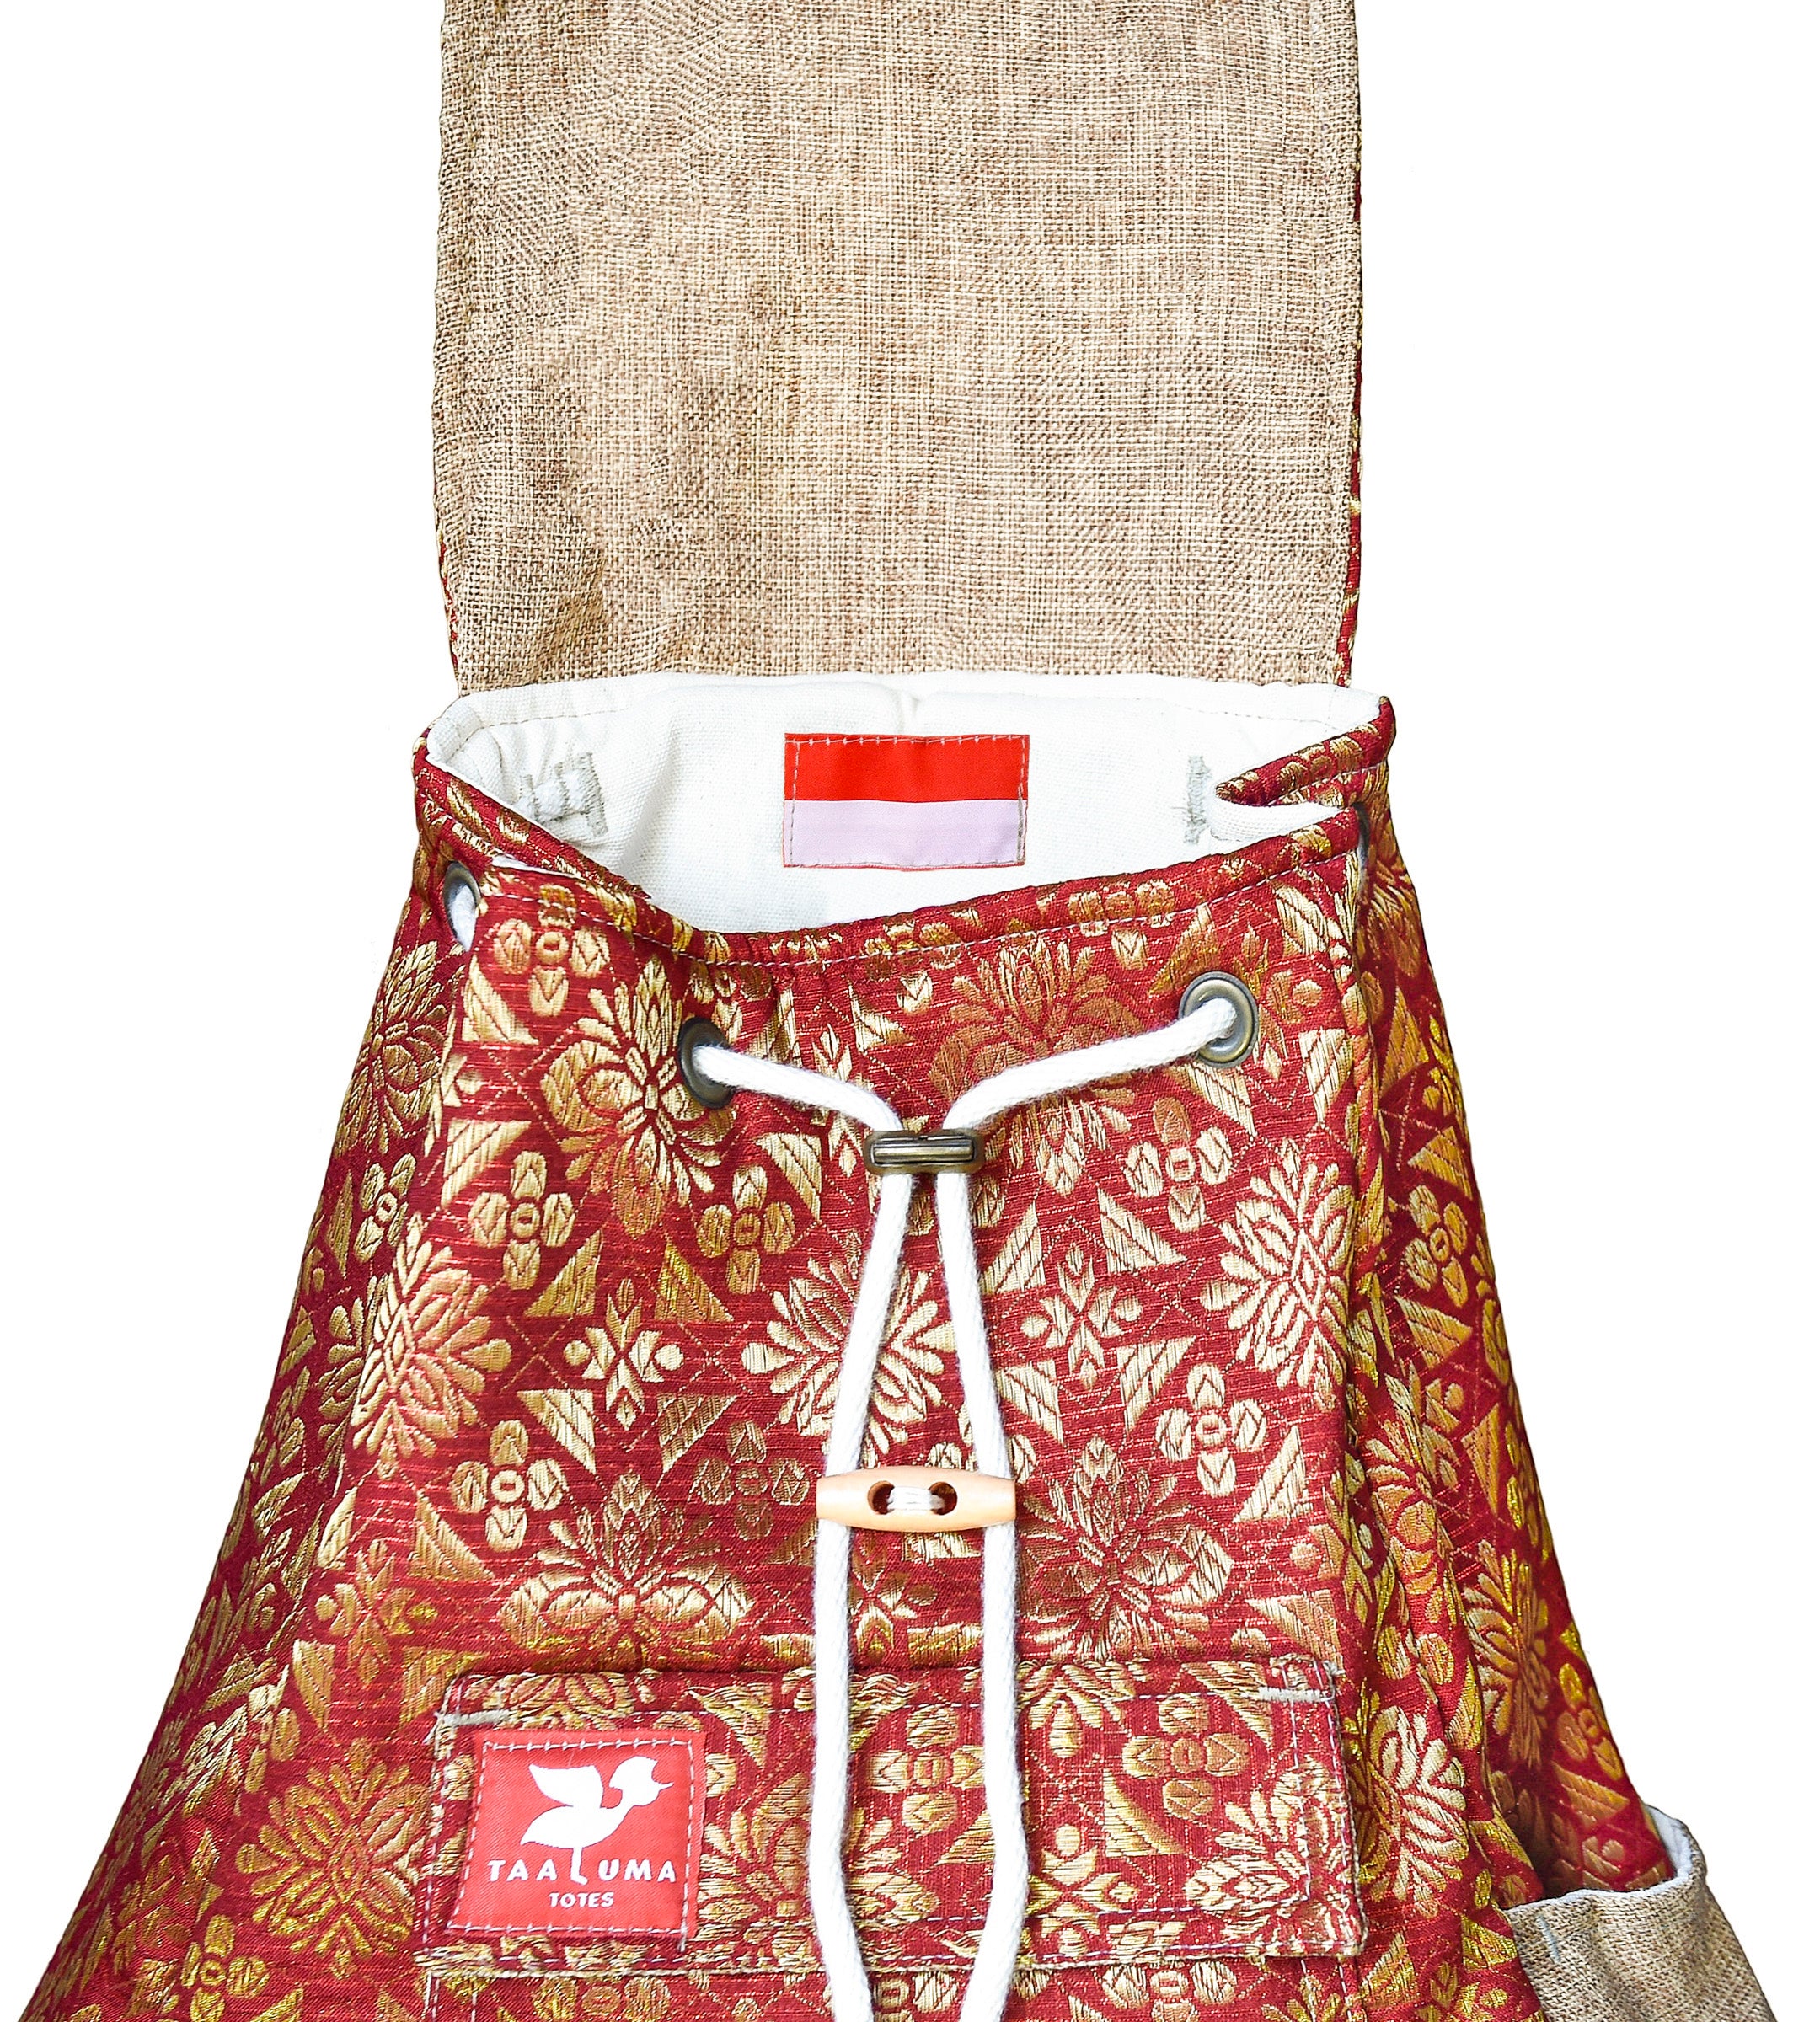 Indonesia Tote (by Christa Beck)